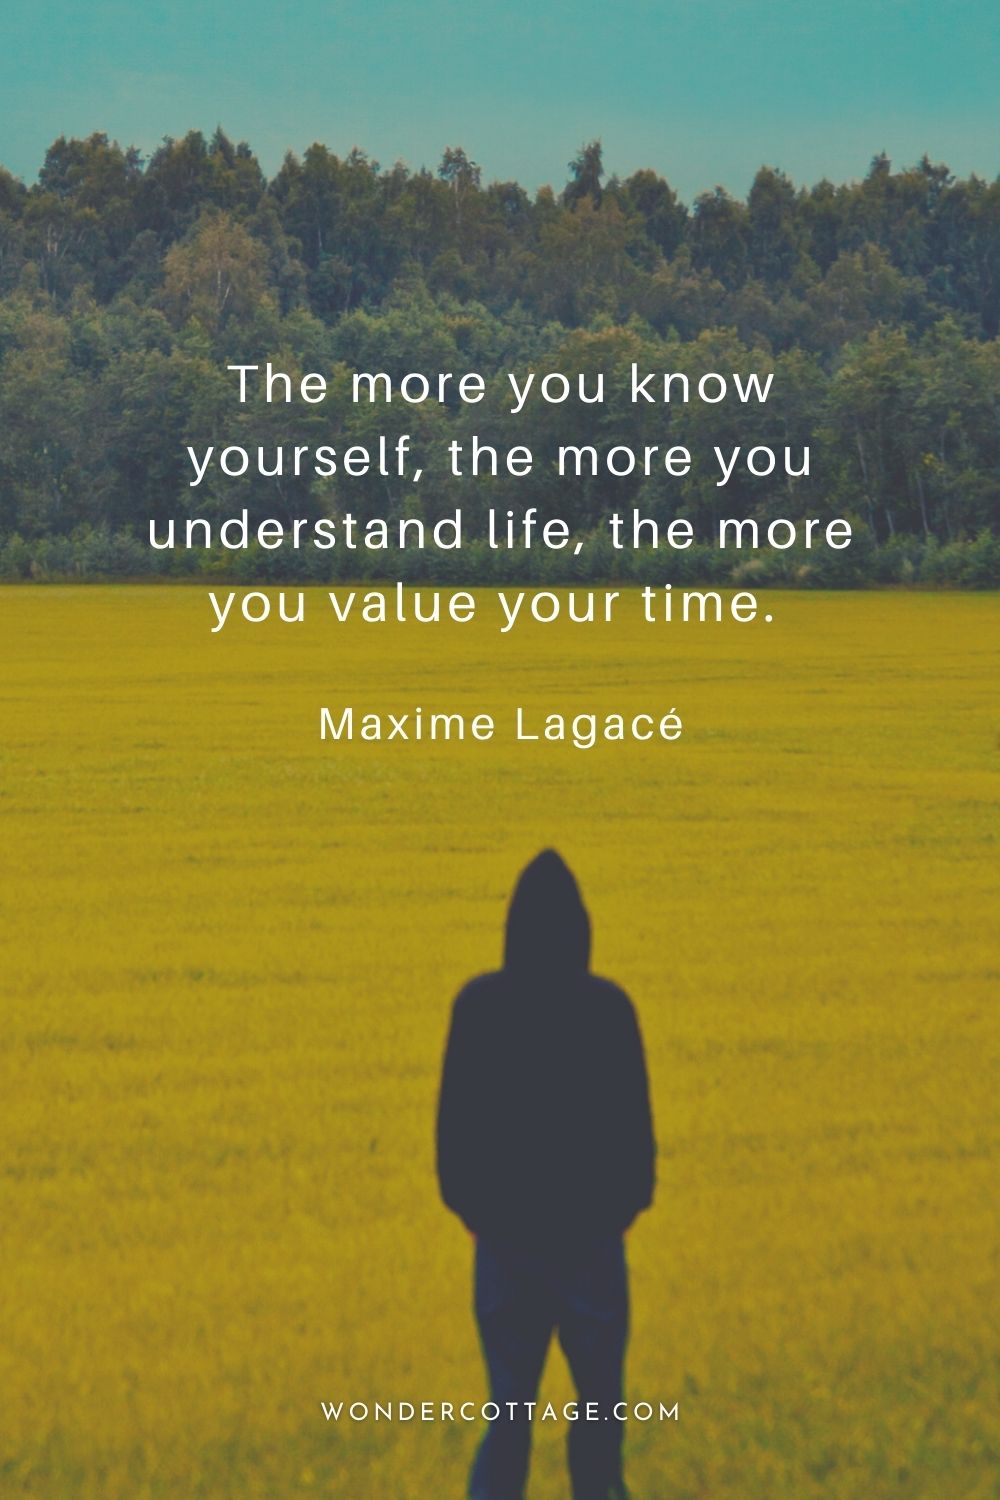 The more you know yourself, the more you understand life, the more you value your time. Maxime Lagacé